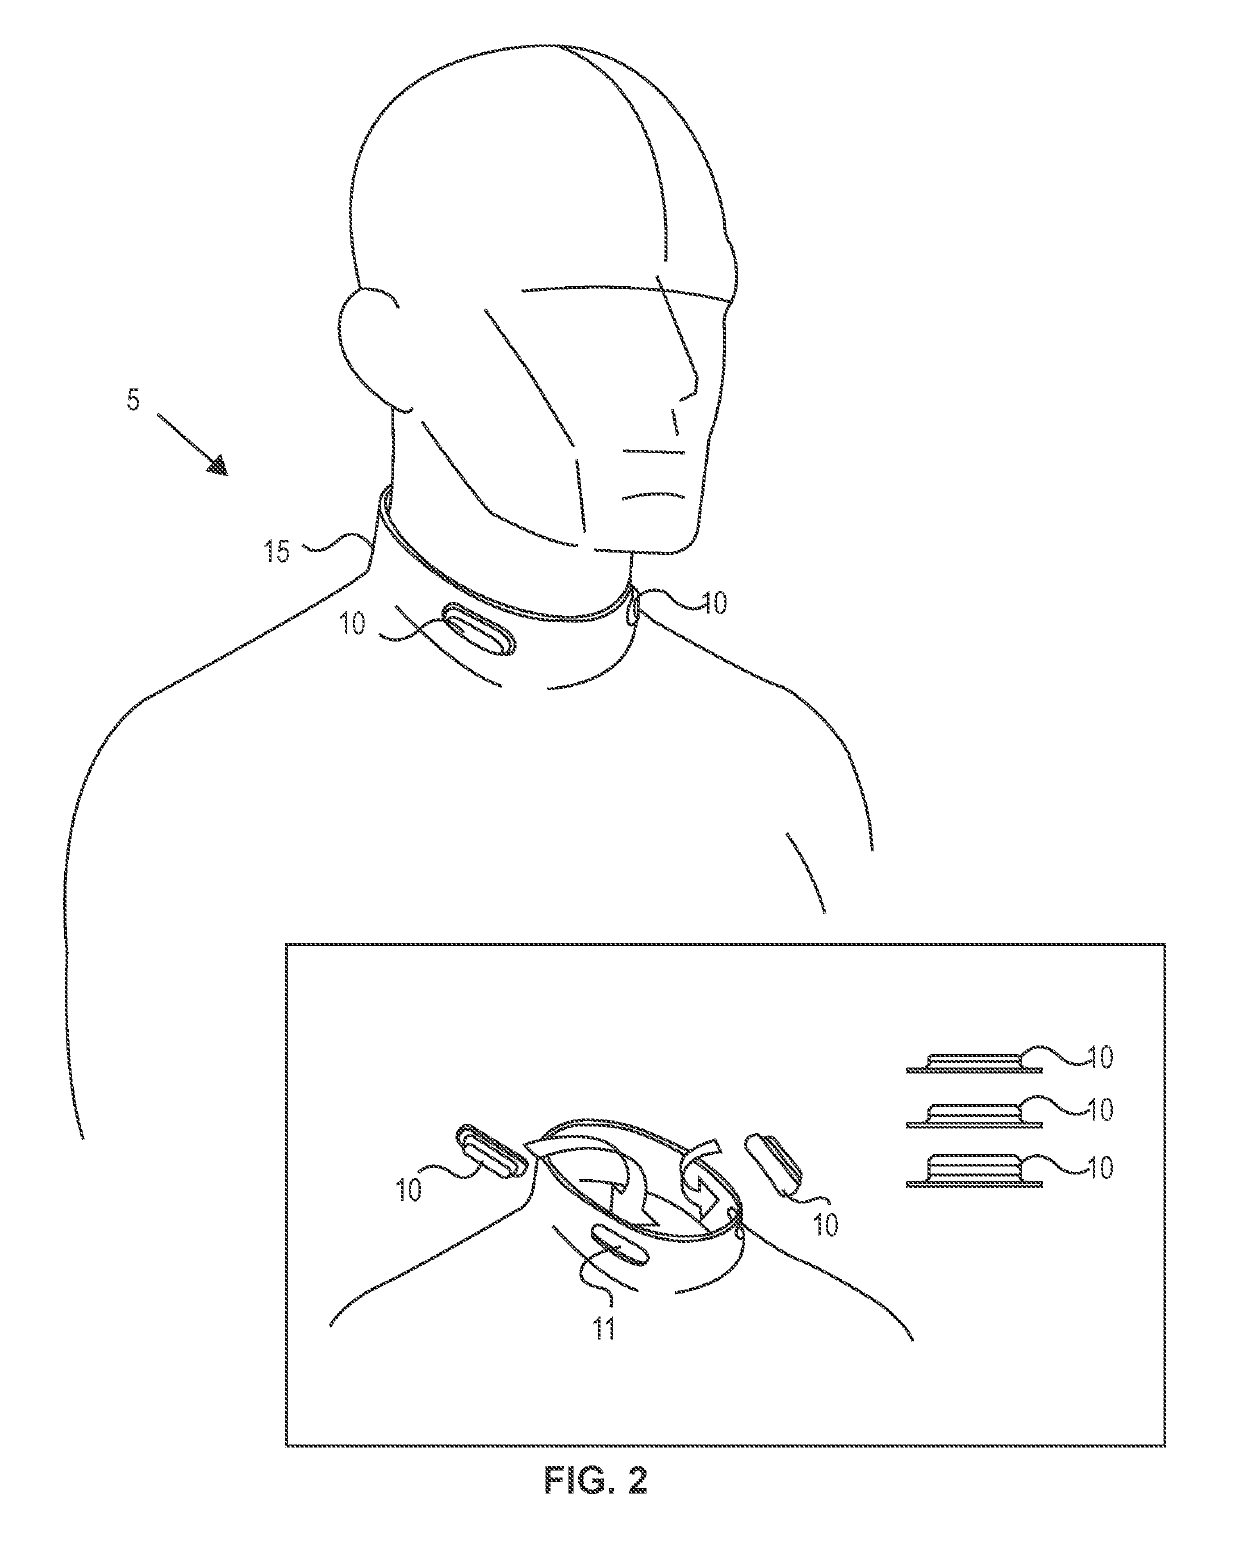 Methods and devices to reduce damaging effects of concussive or blast forces on a subject